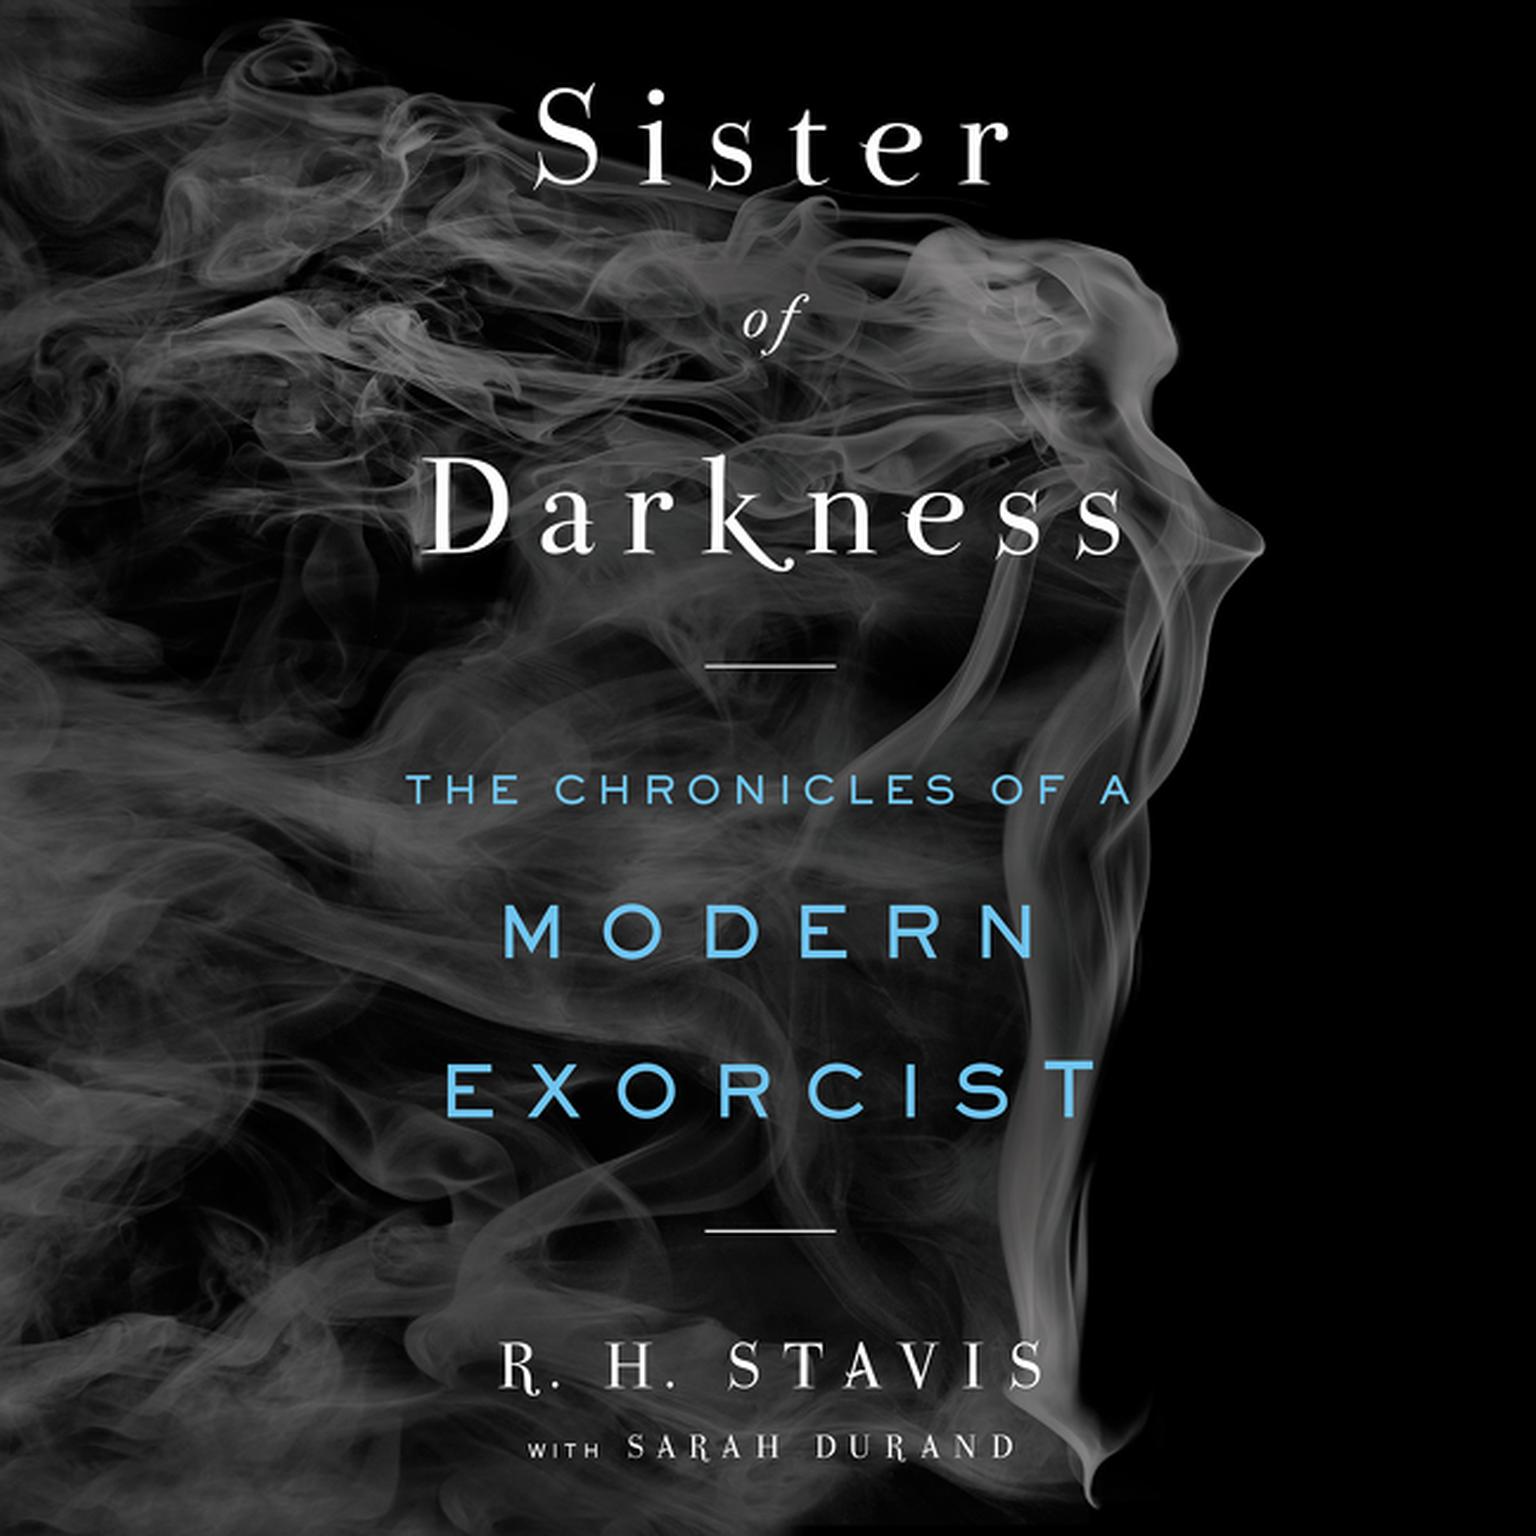 Sister of Darkness: The Chronicles of a Modern Exorcist Audiobook, by Rachel H. Stavis